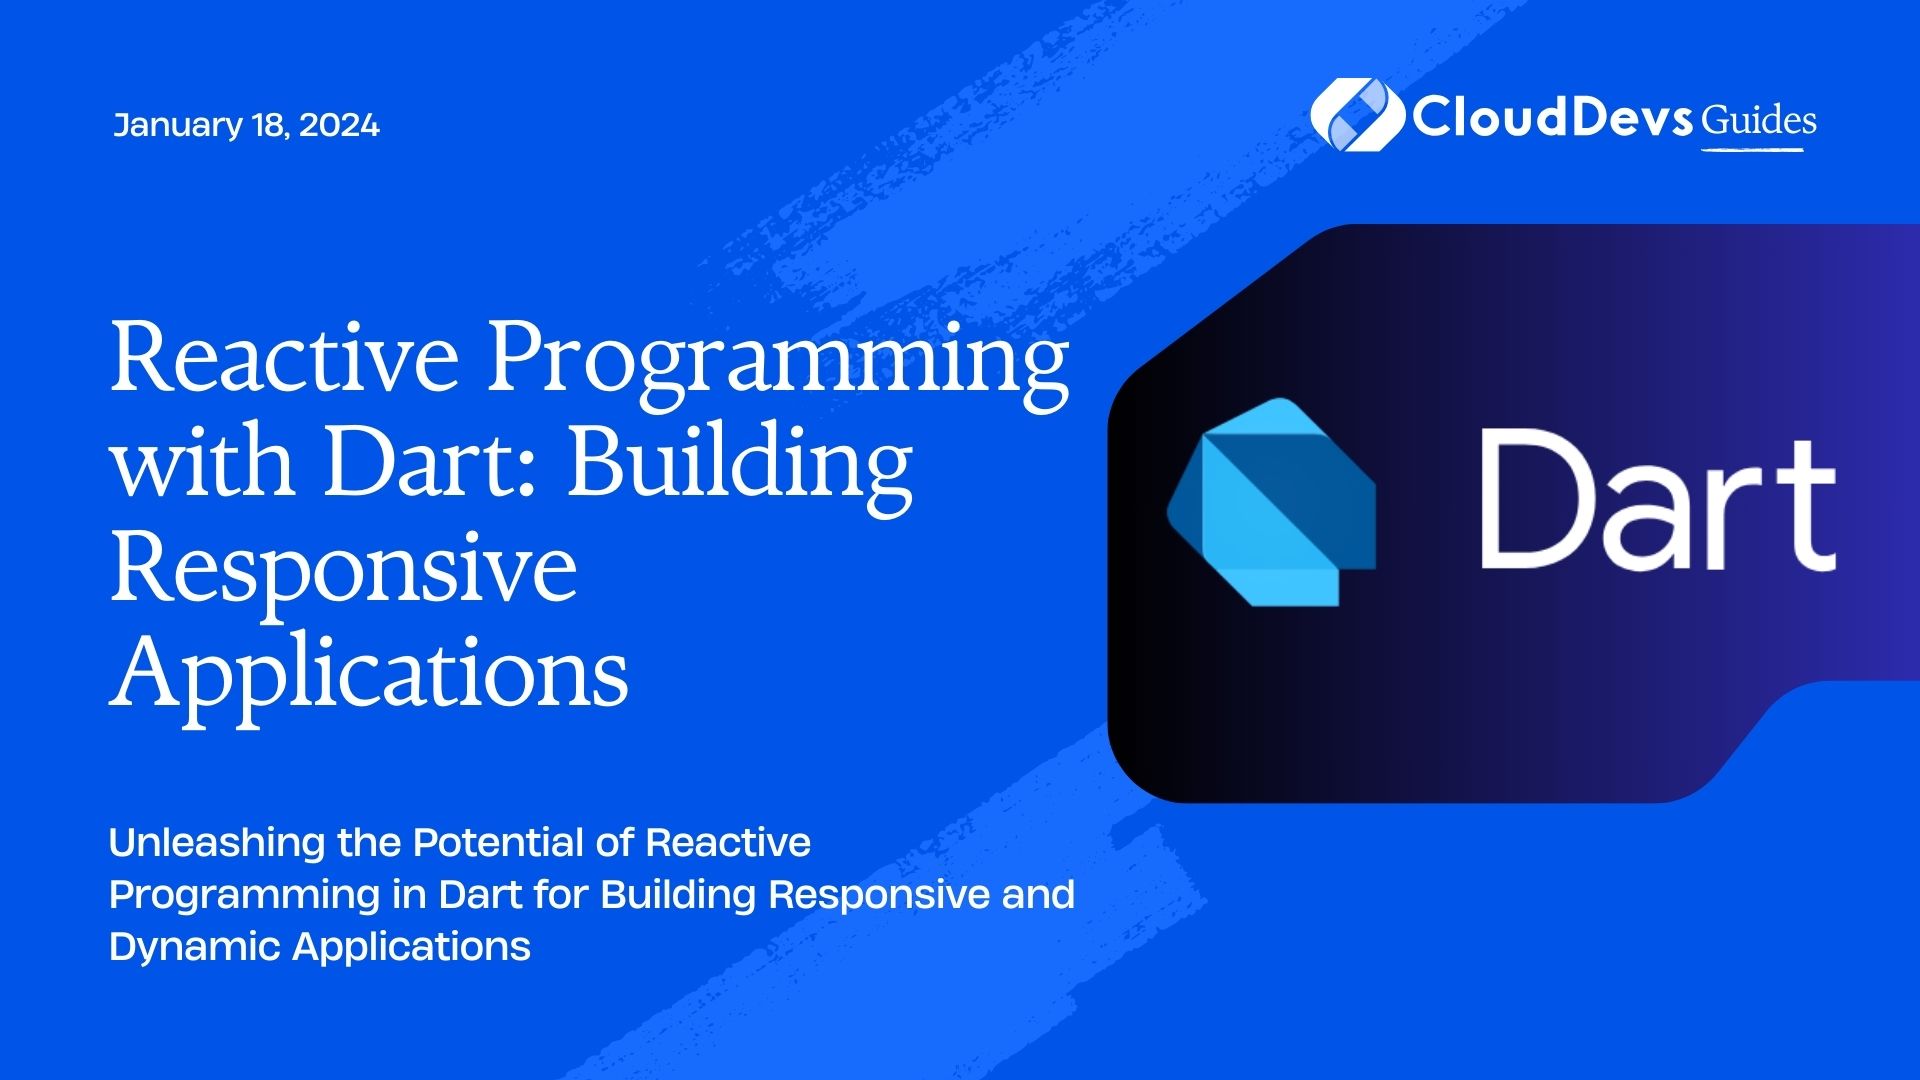 Reactive Programming with Dart: Building Responsive Applications